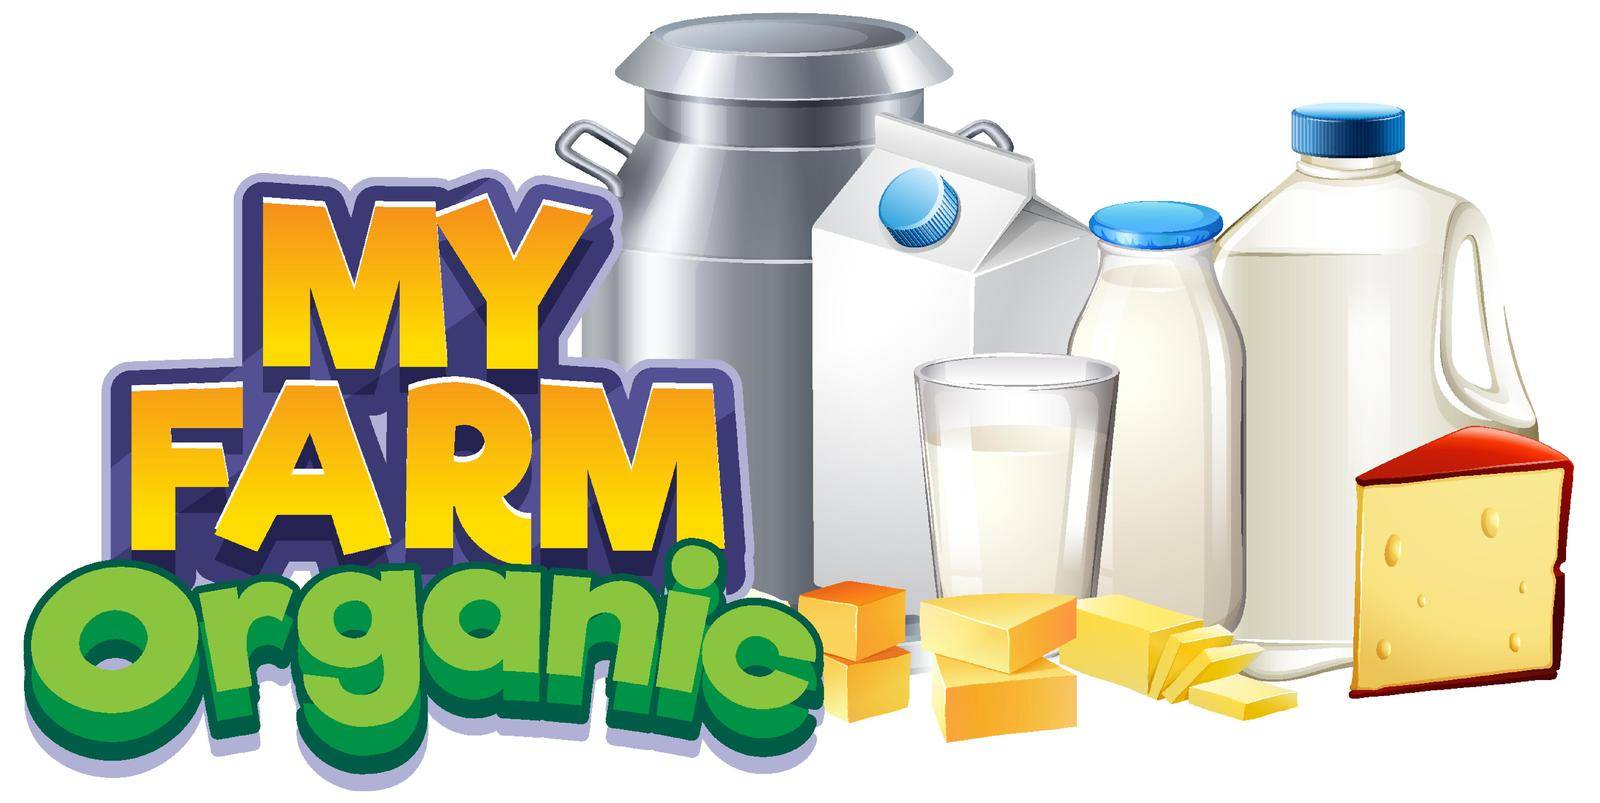 Font design for word my farm with fresh dairy products illustration